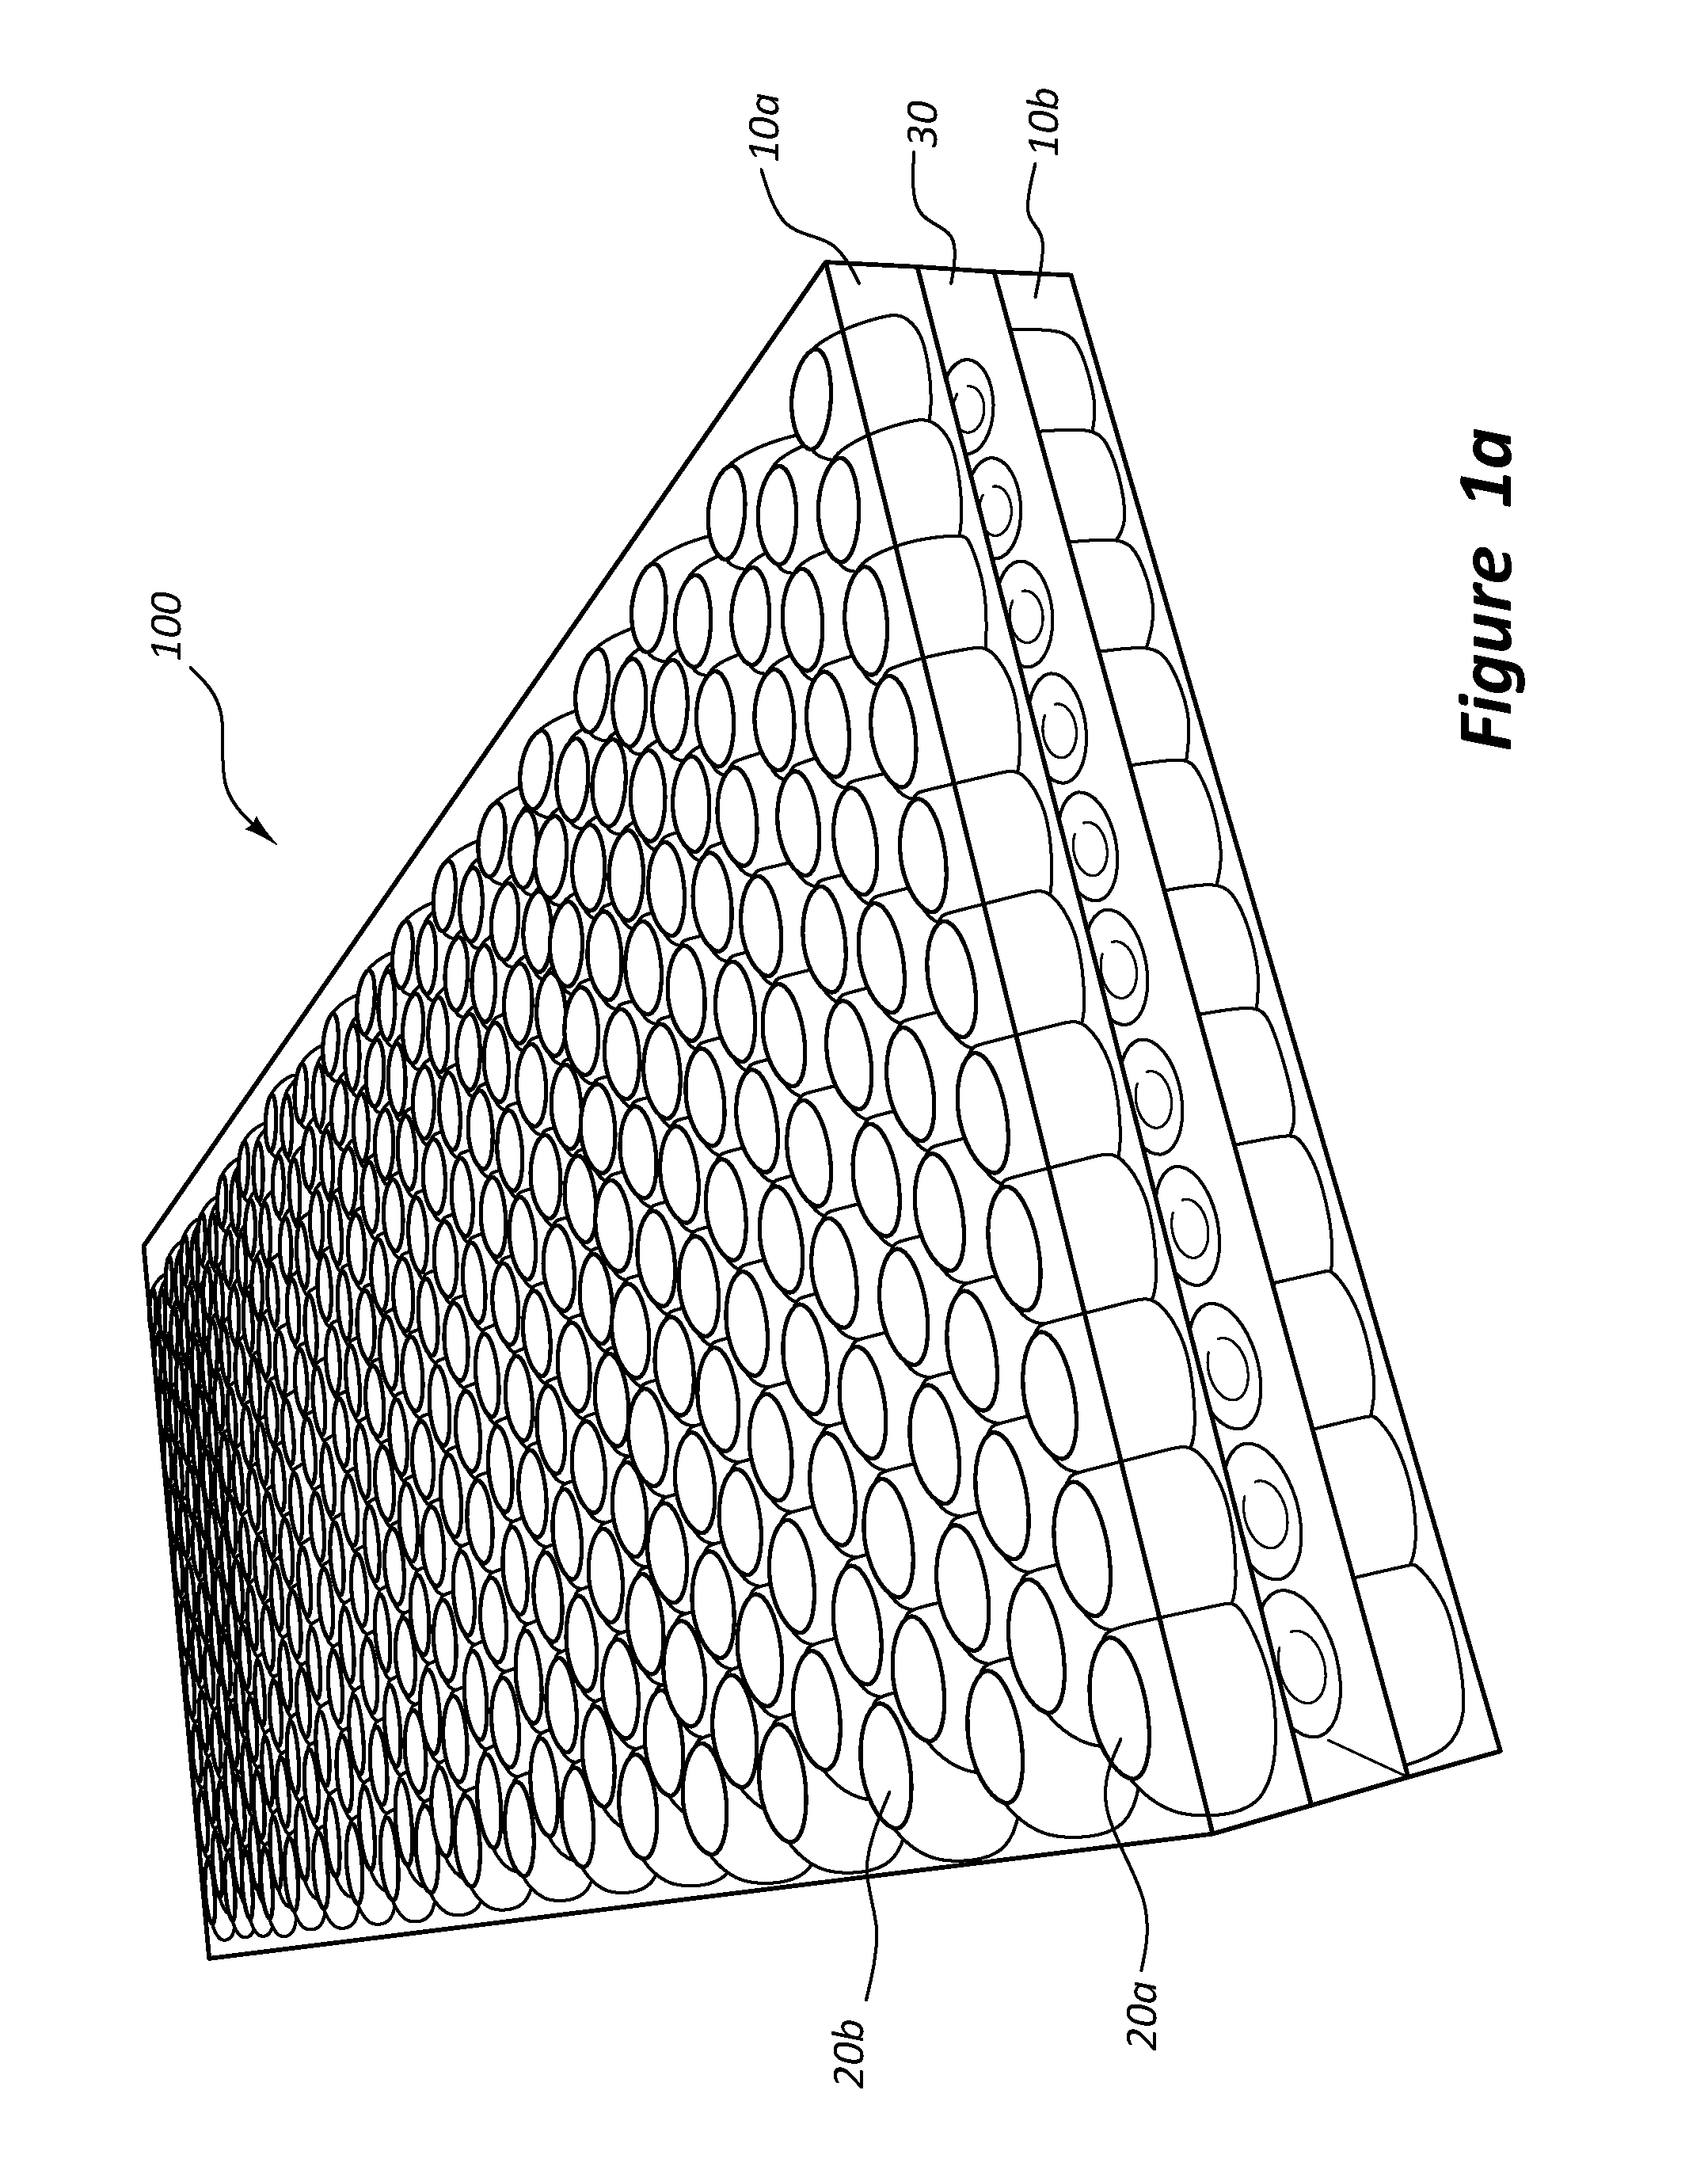 Multilayered Phantom Tissue Test Structure and Fabrication Process